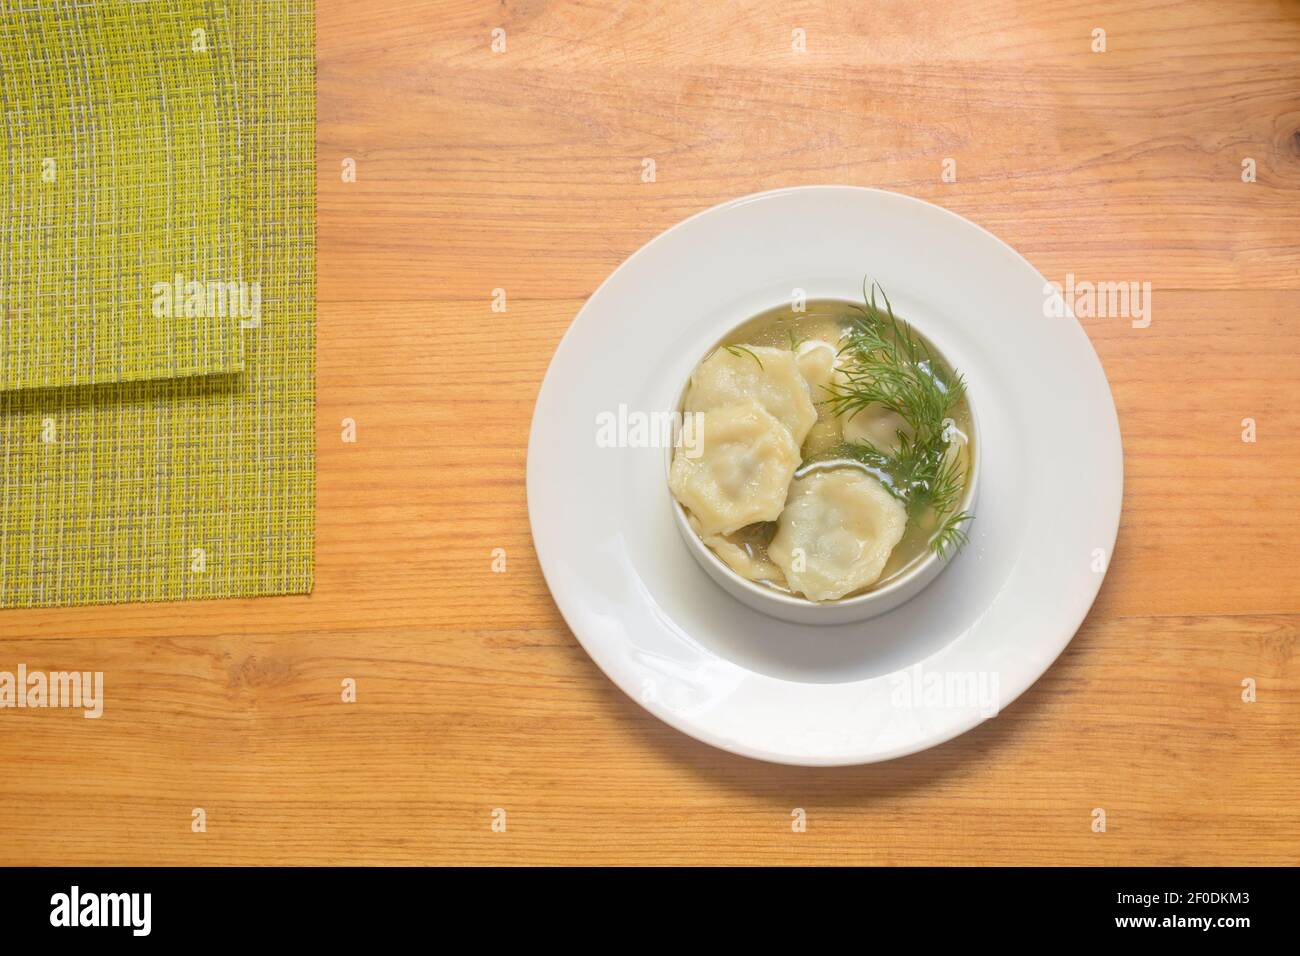 Plate of hot dumplings with sour cream and dill. Traditional Russian and Ukrainian cuisine. Stock Photo